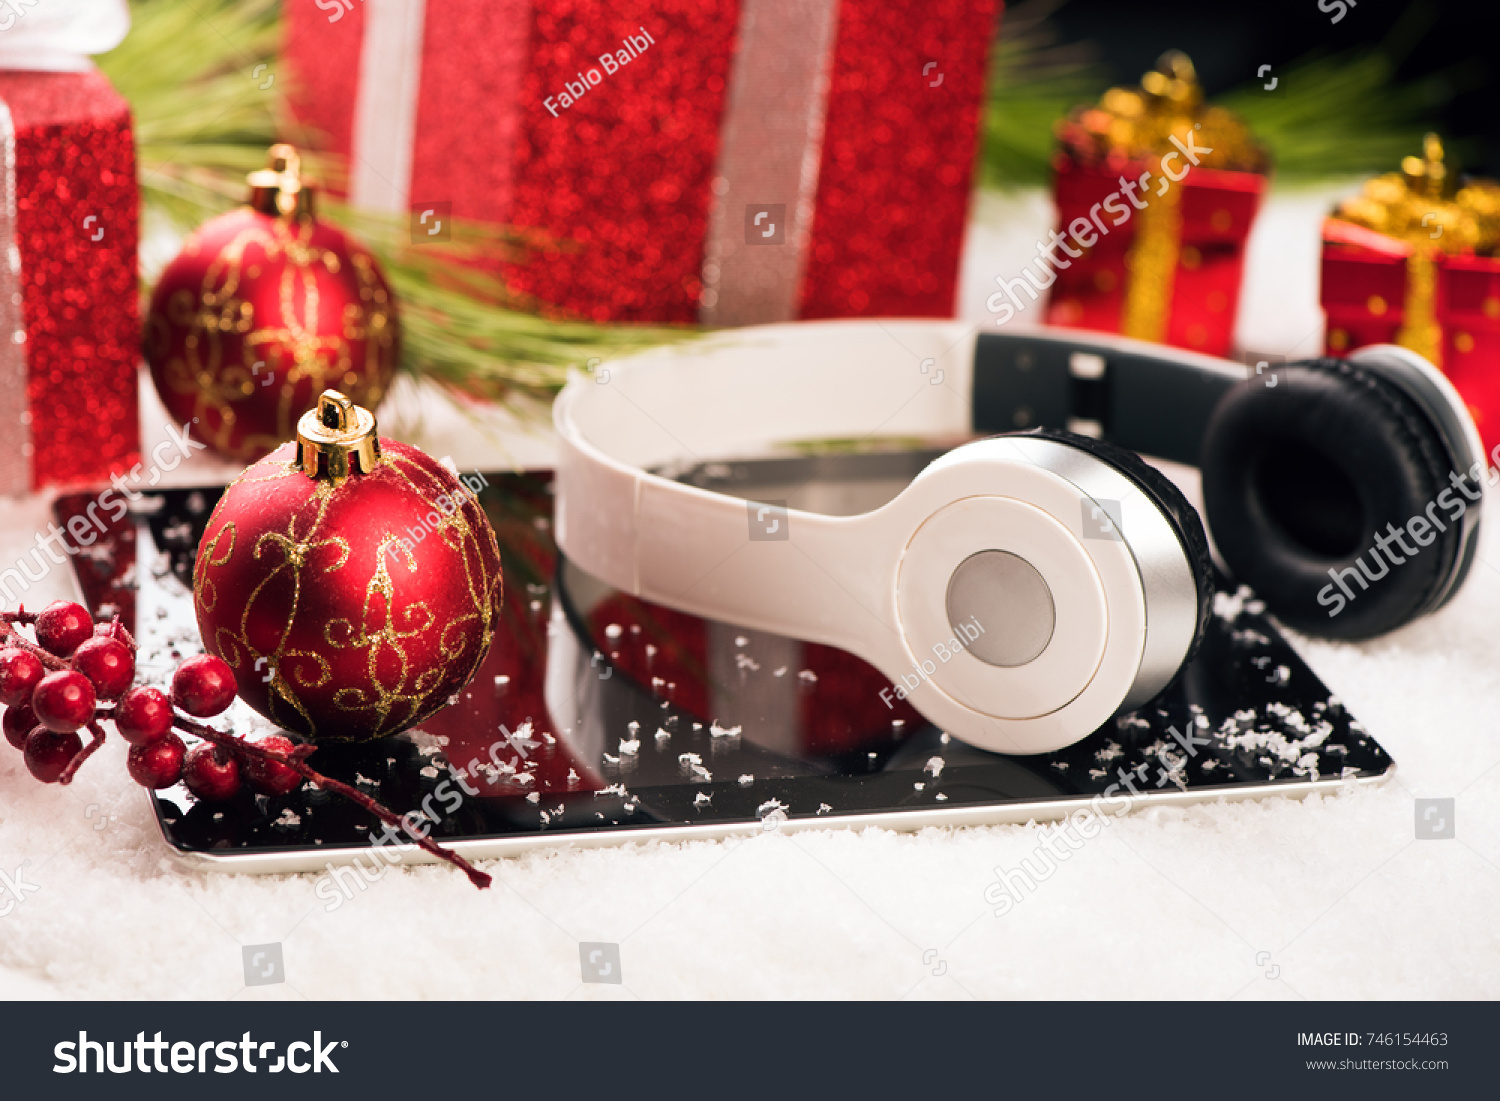 Tablet and headphone best christmas gift concept #746154463